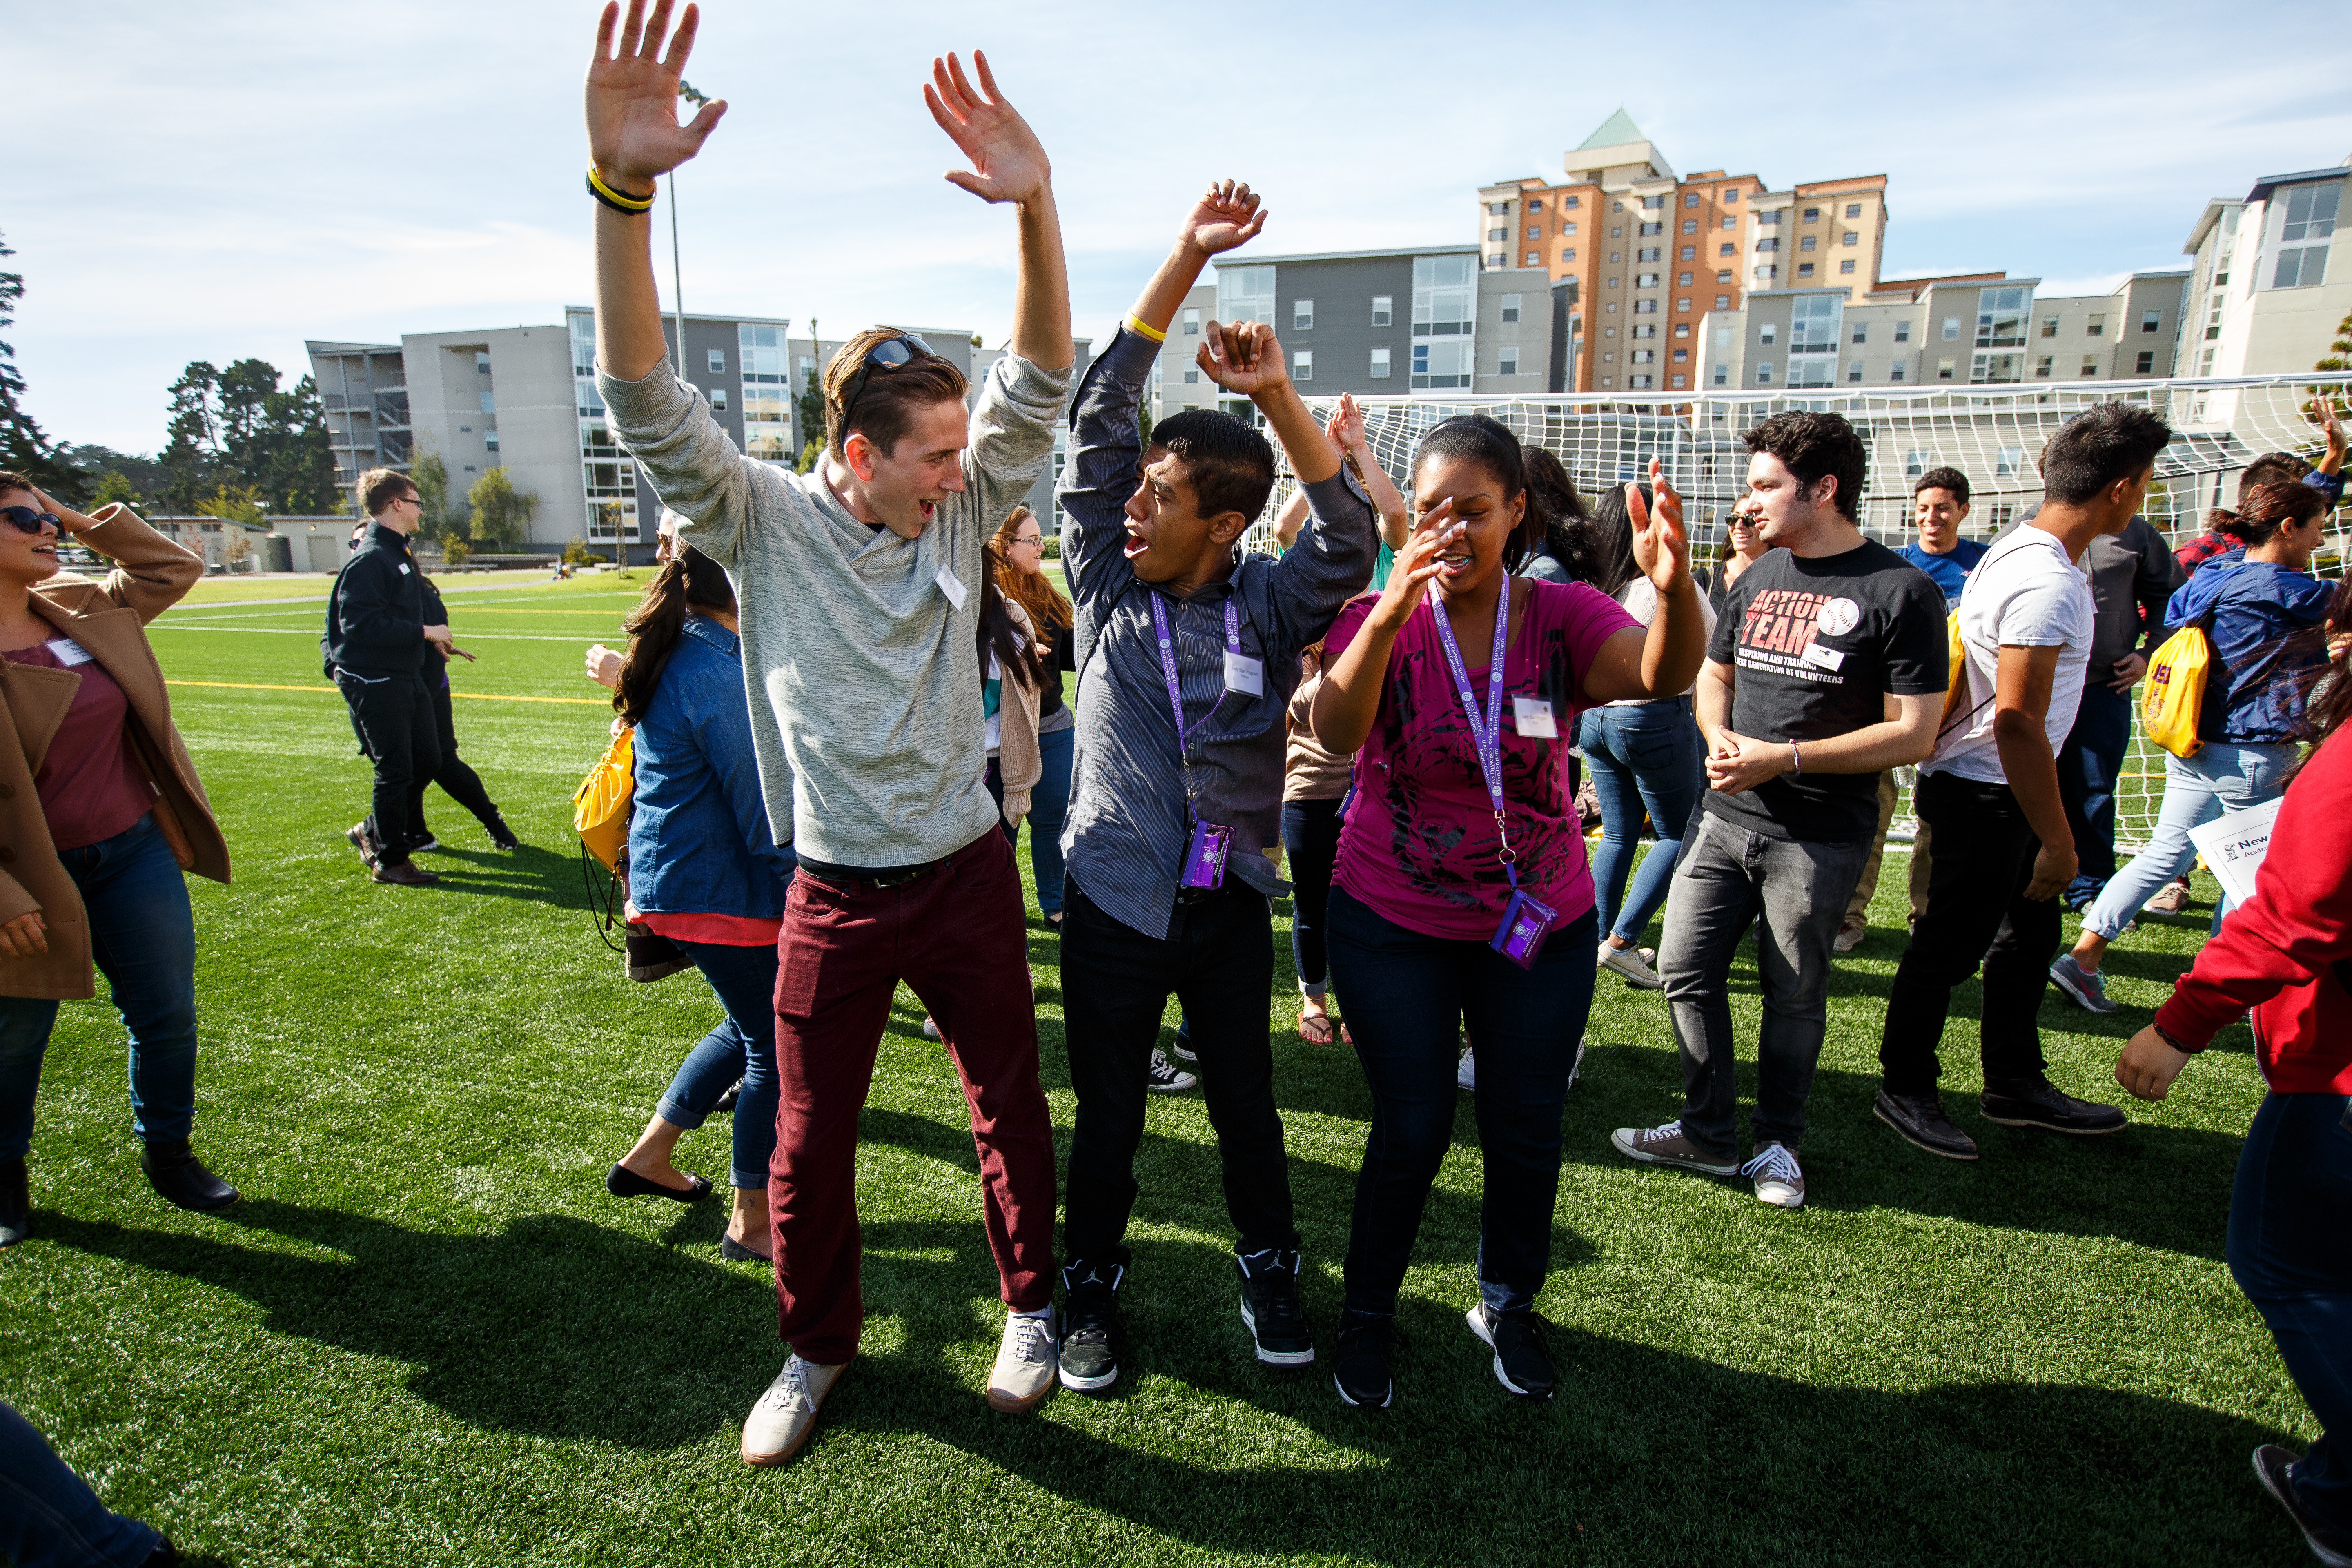 Students engaged in an activity outdoors on the West Campus Green